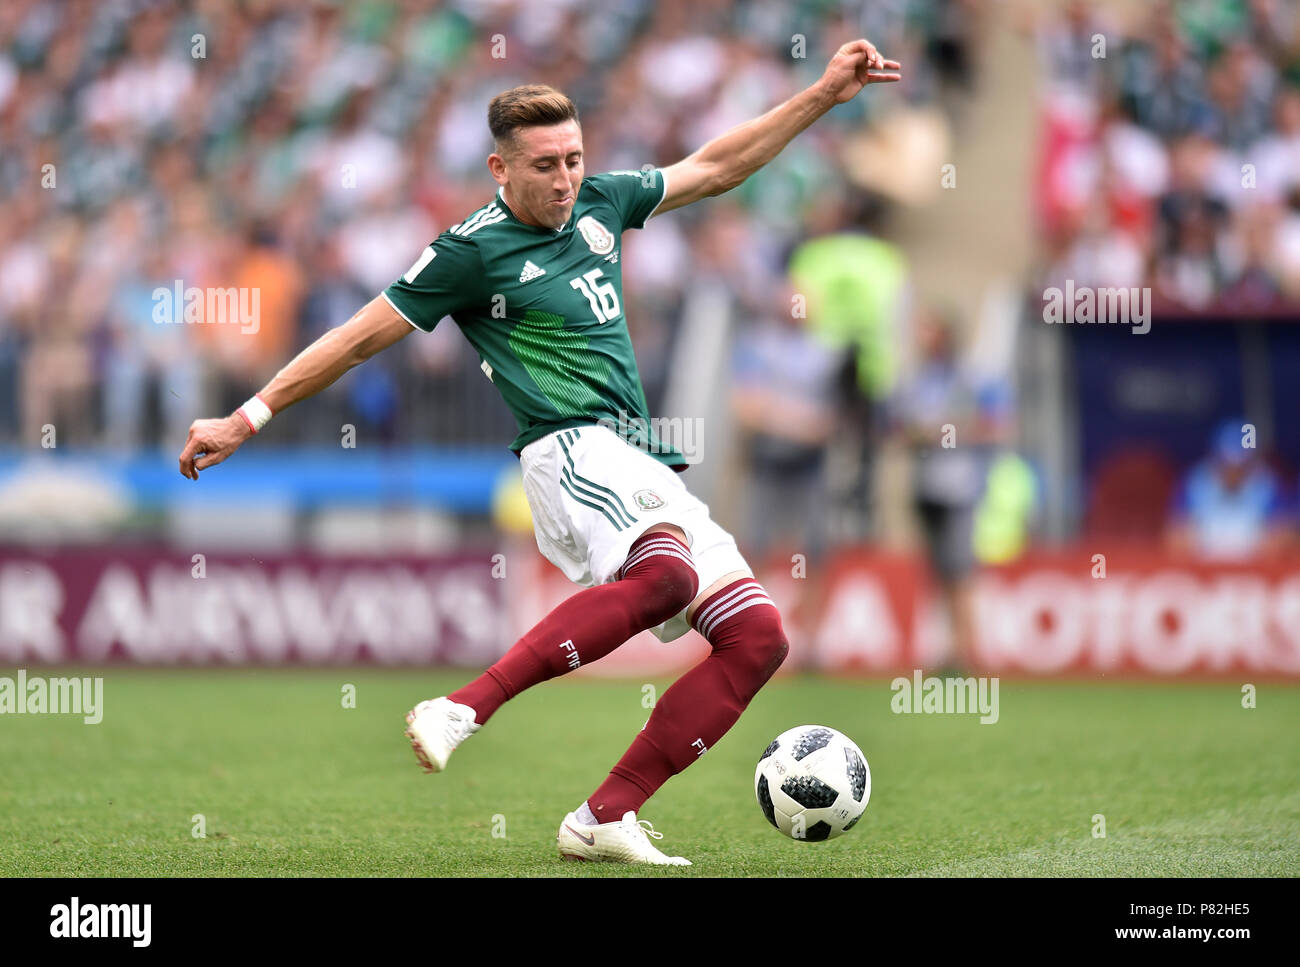 MOSCOW, RUSSIA - JUNE 17: Hector Herrera of Mexico in action during the 2018 FIFA World Cup Russia group F match between Germany and Mexico at Luzhniki Stadium on June 17, 2018 in Moscow, Russia. (Photo by Lukasz Laskowski/PressFocus/MB Media) Stock Photo